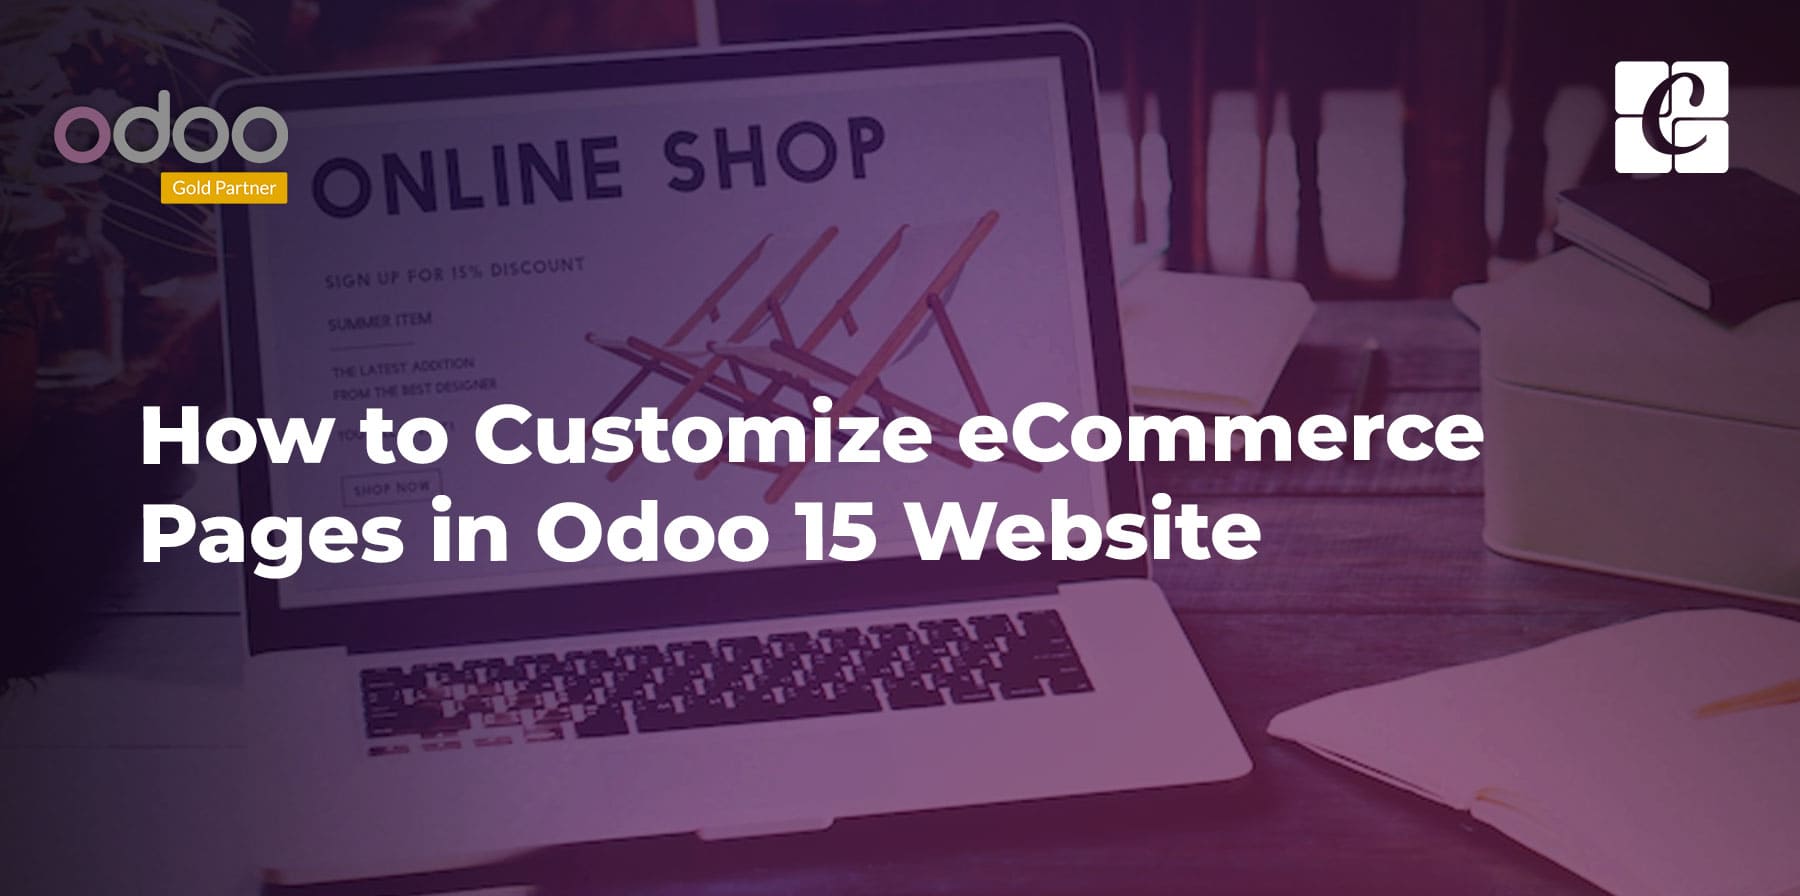 how-to-customize-ecommerce-pages-in-odoo-15-website.jpg